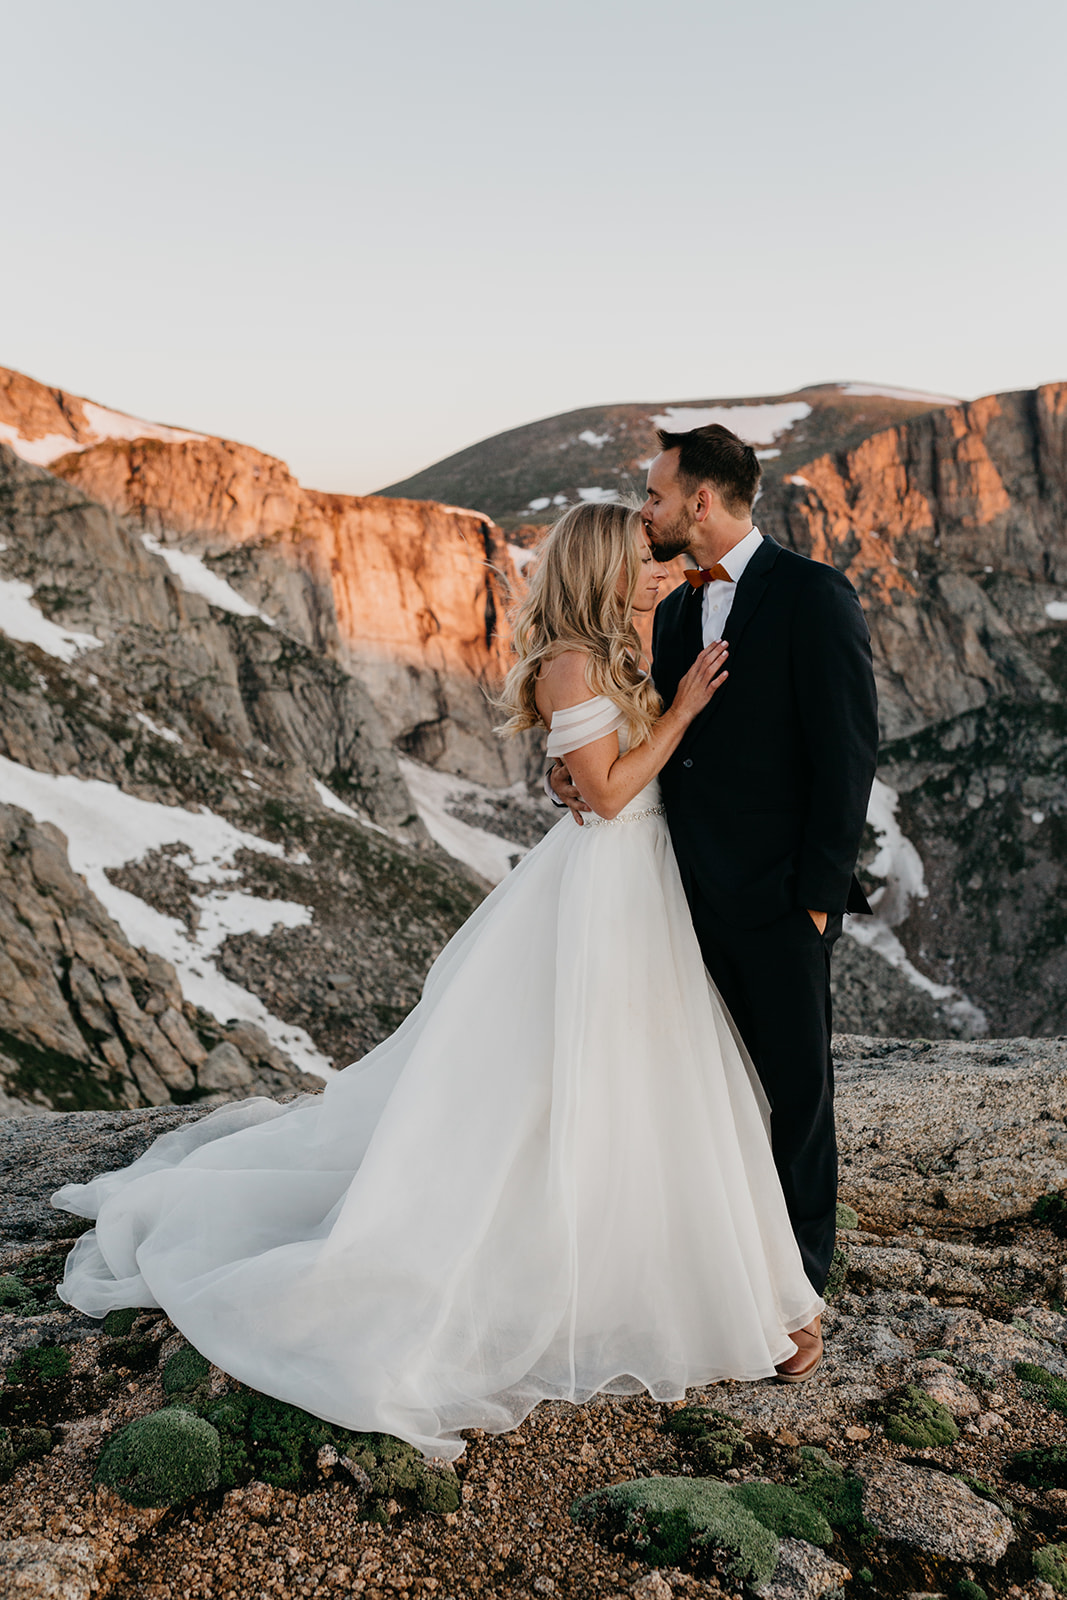 Bride and groom kissing at their rocky mountain wedding